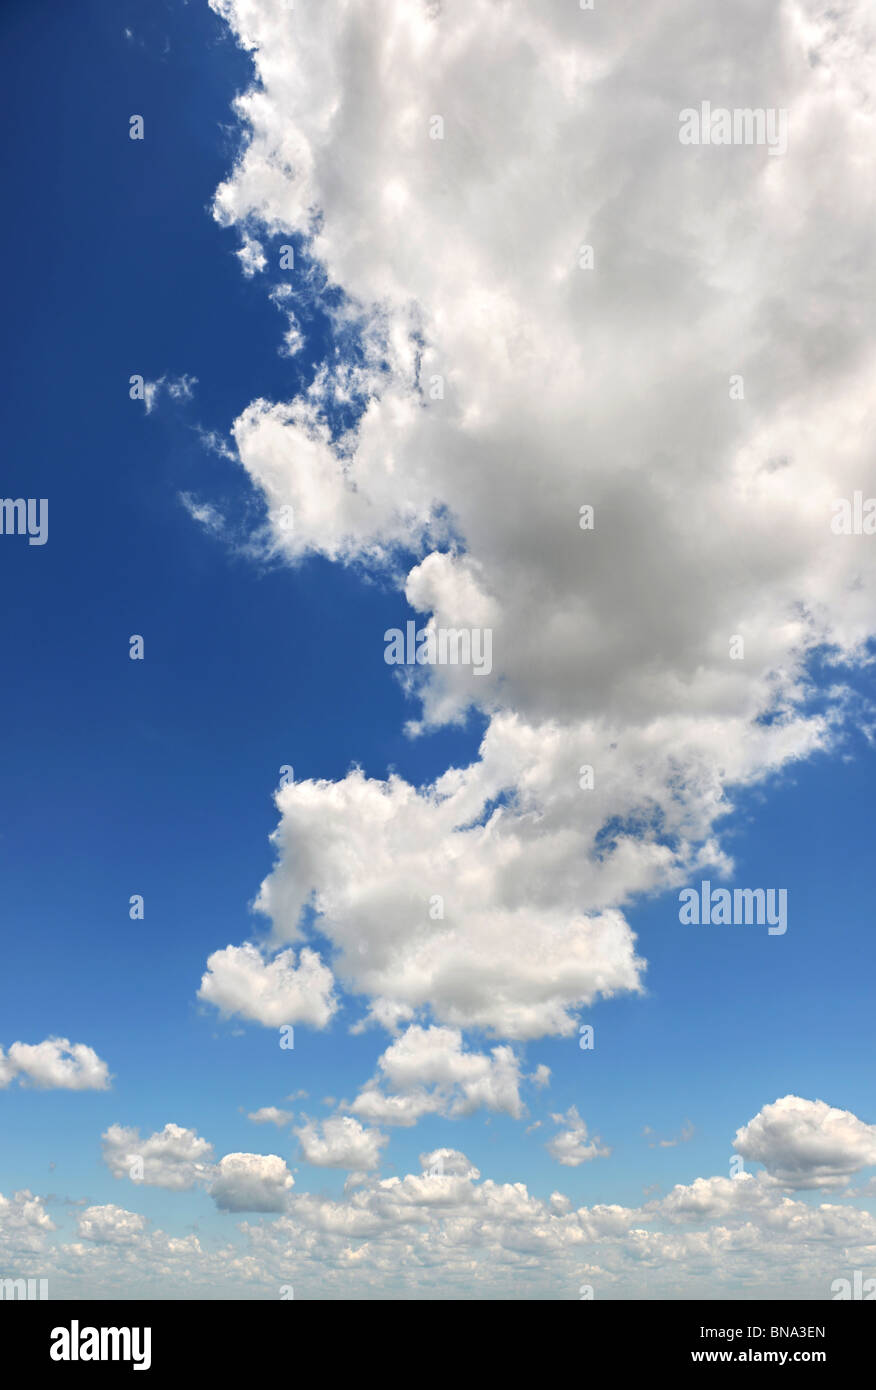 Blue sky with large clouds in vertical format Stock Photo